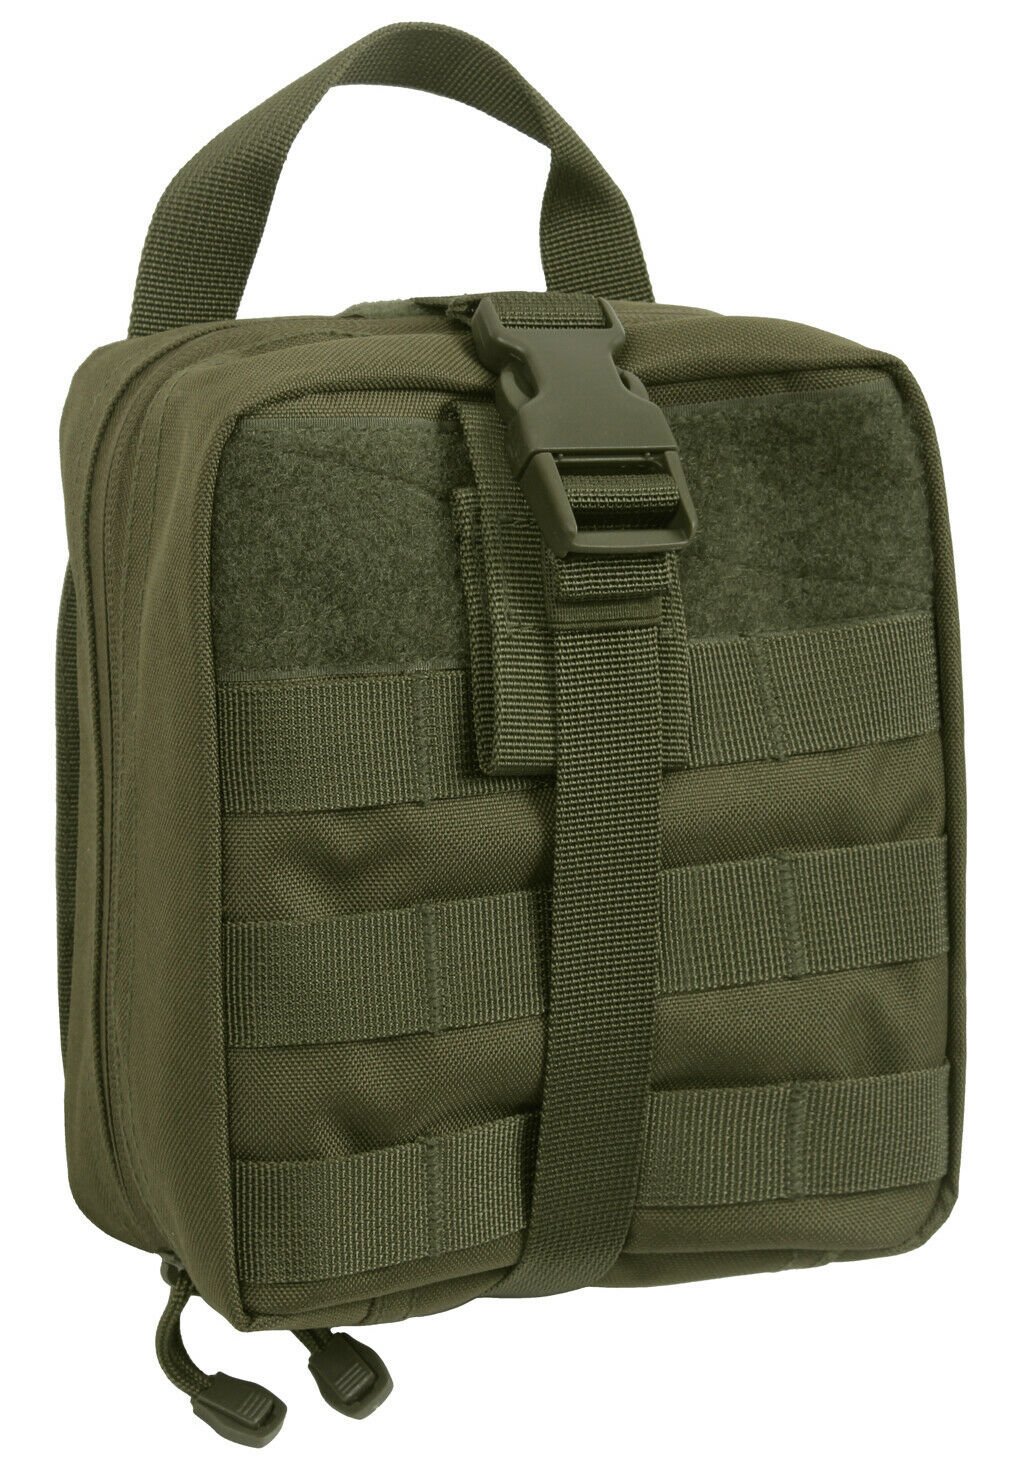 Rothco Tactical MOLLE Breakaway Pouch - Olive Drab